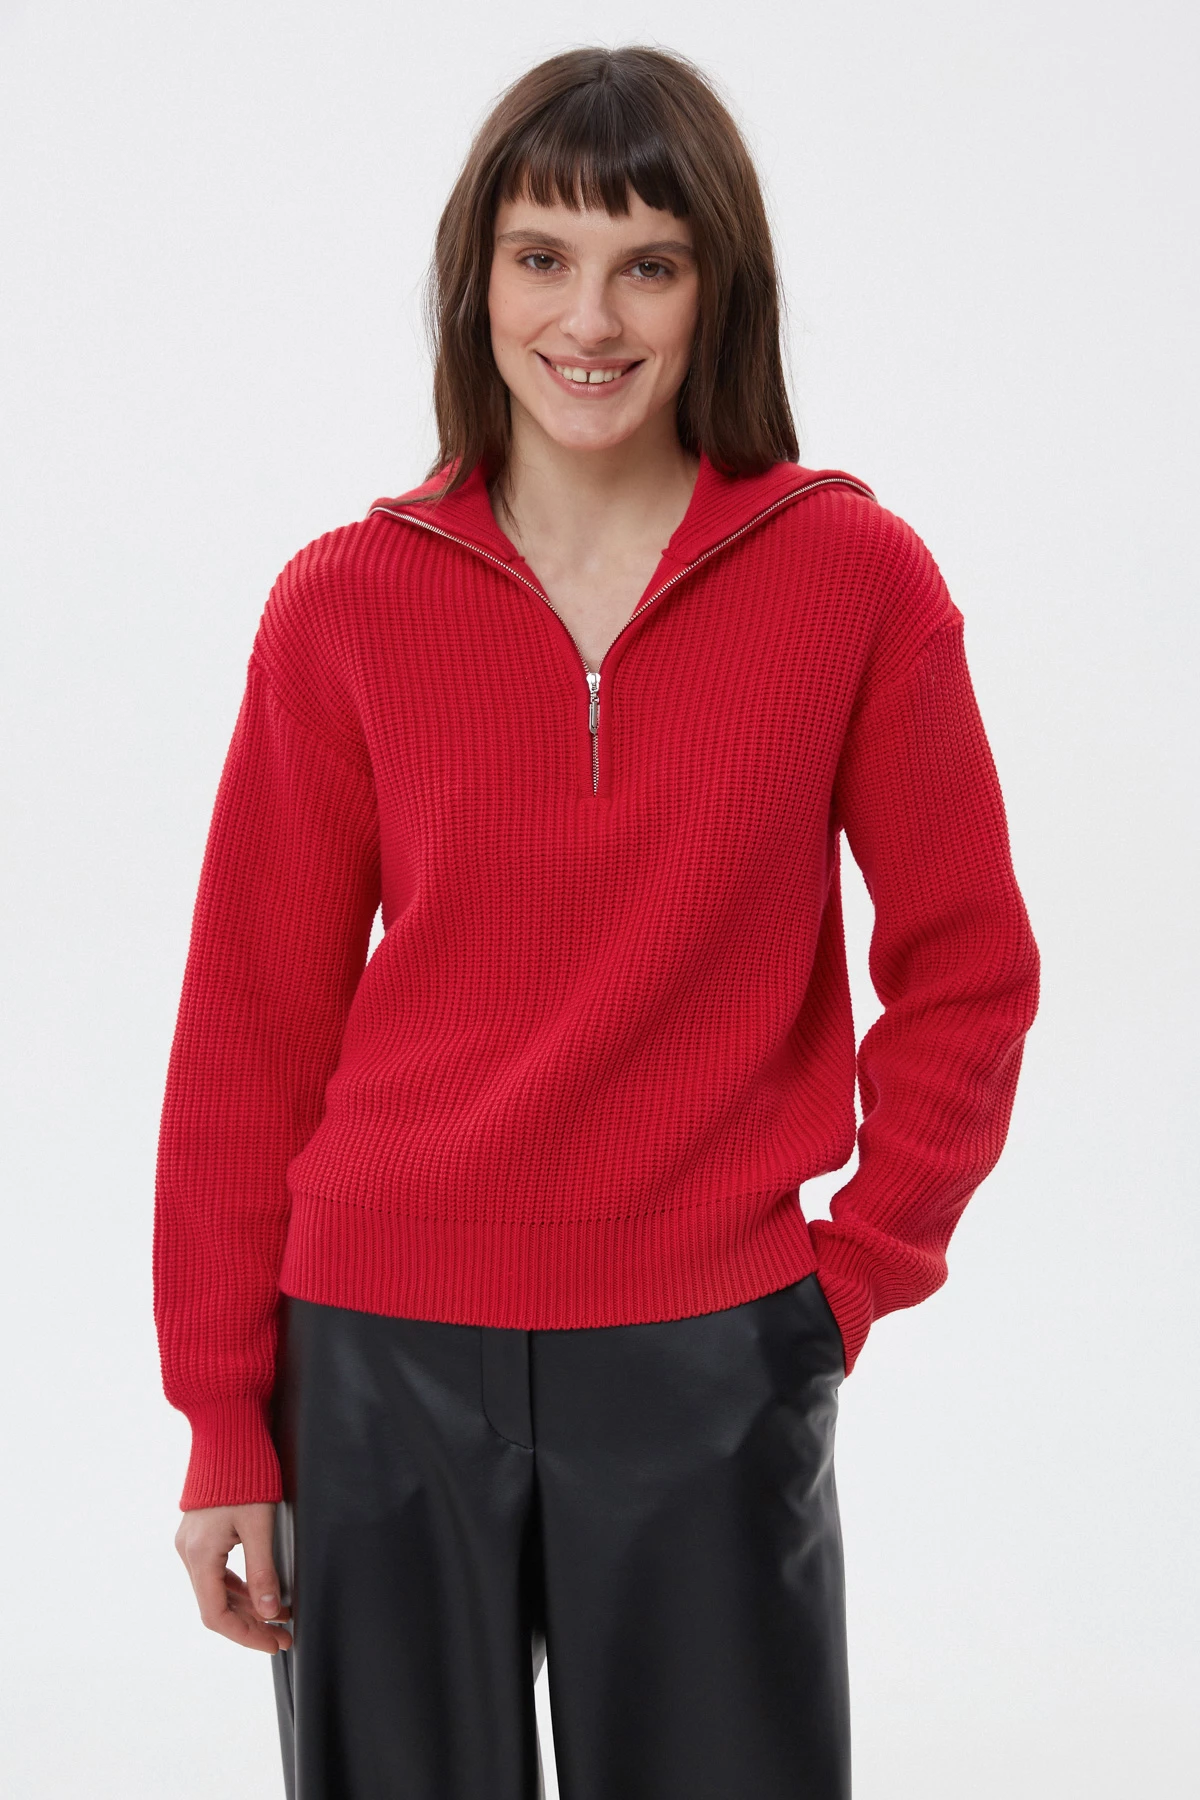 Red cotton zip-up knit sweater, photo 4